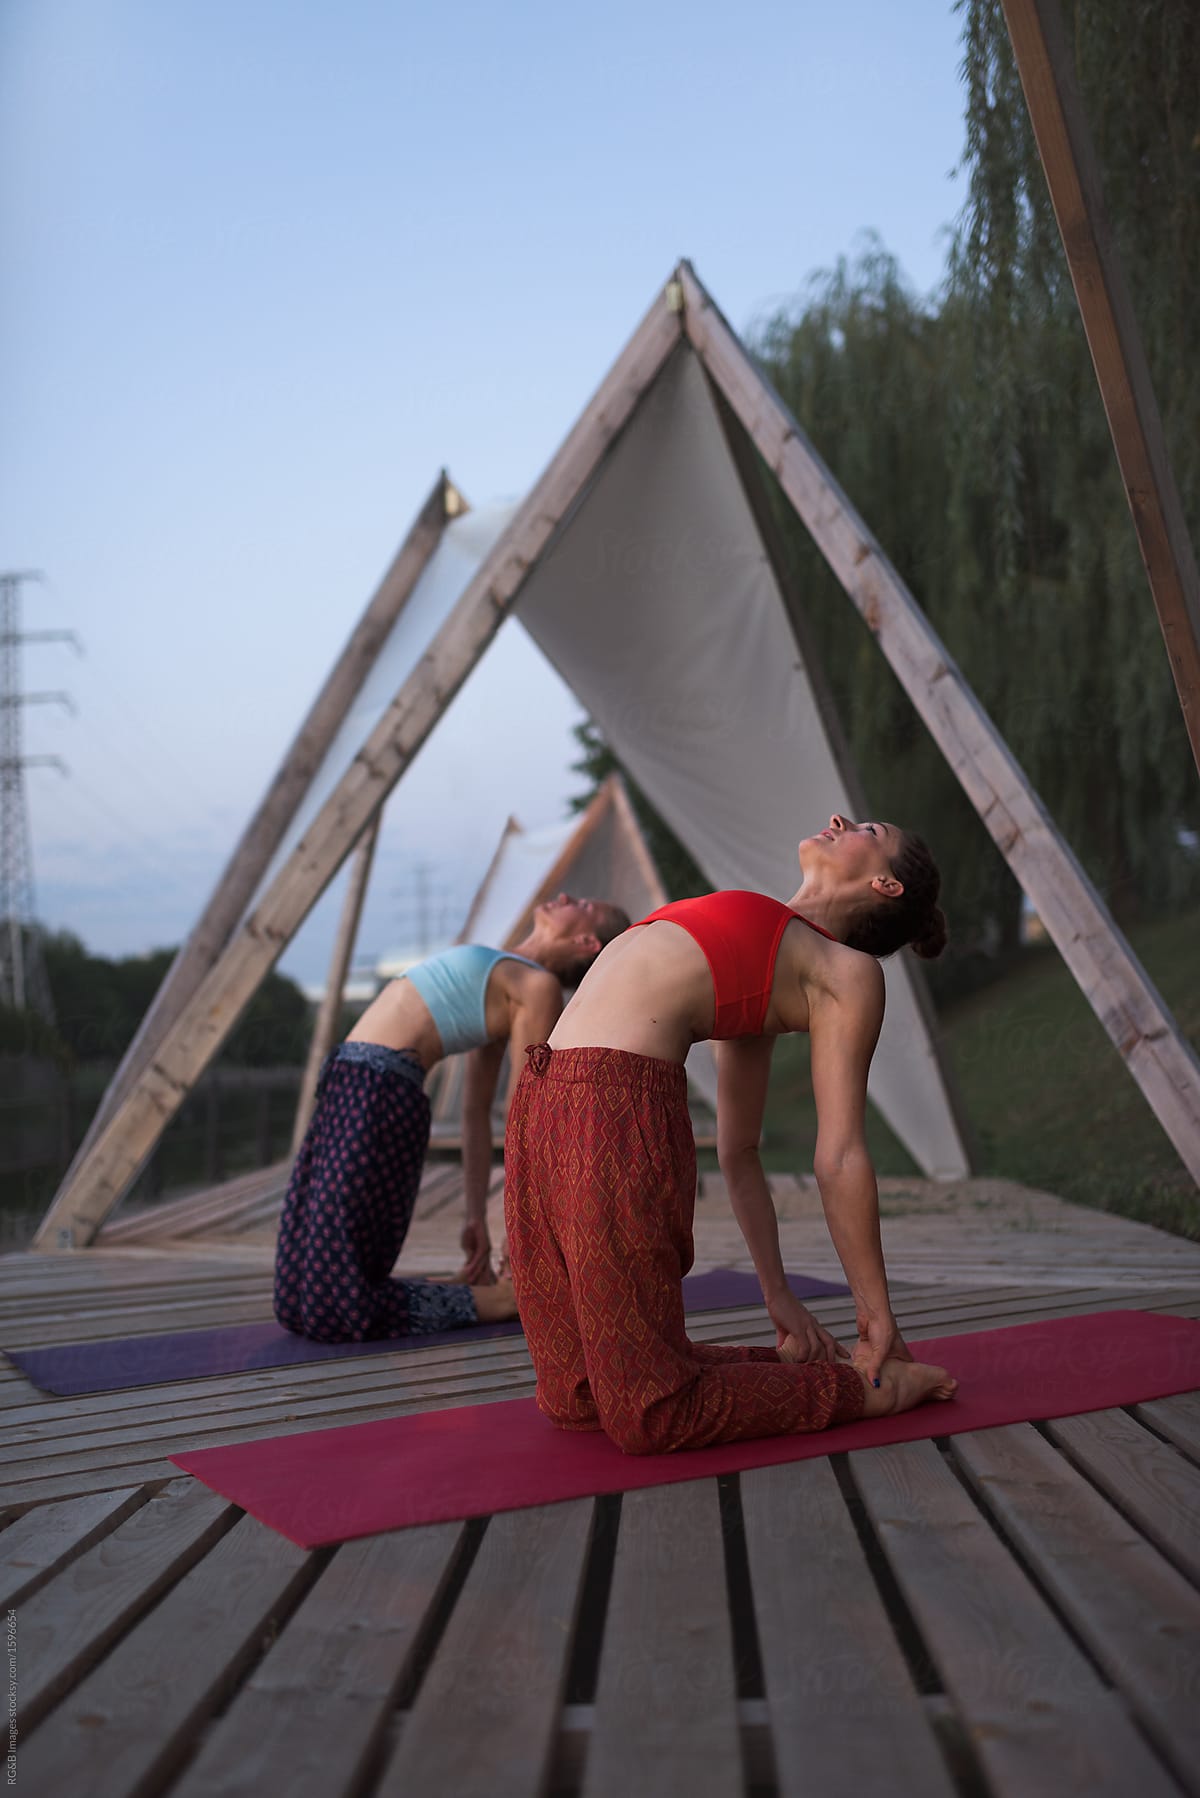 Two women practicing yoga outdoor on wooden pontoon